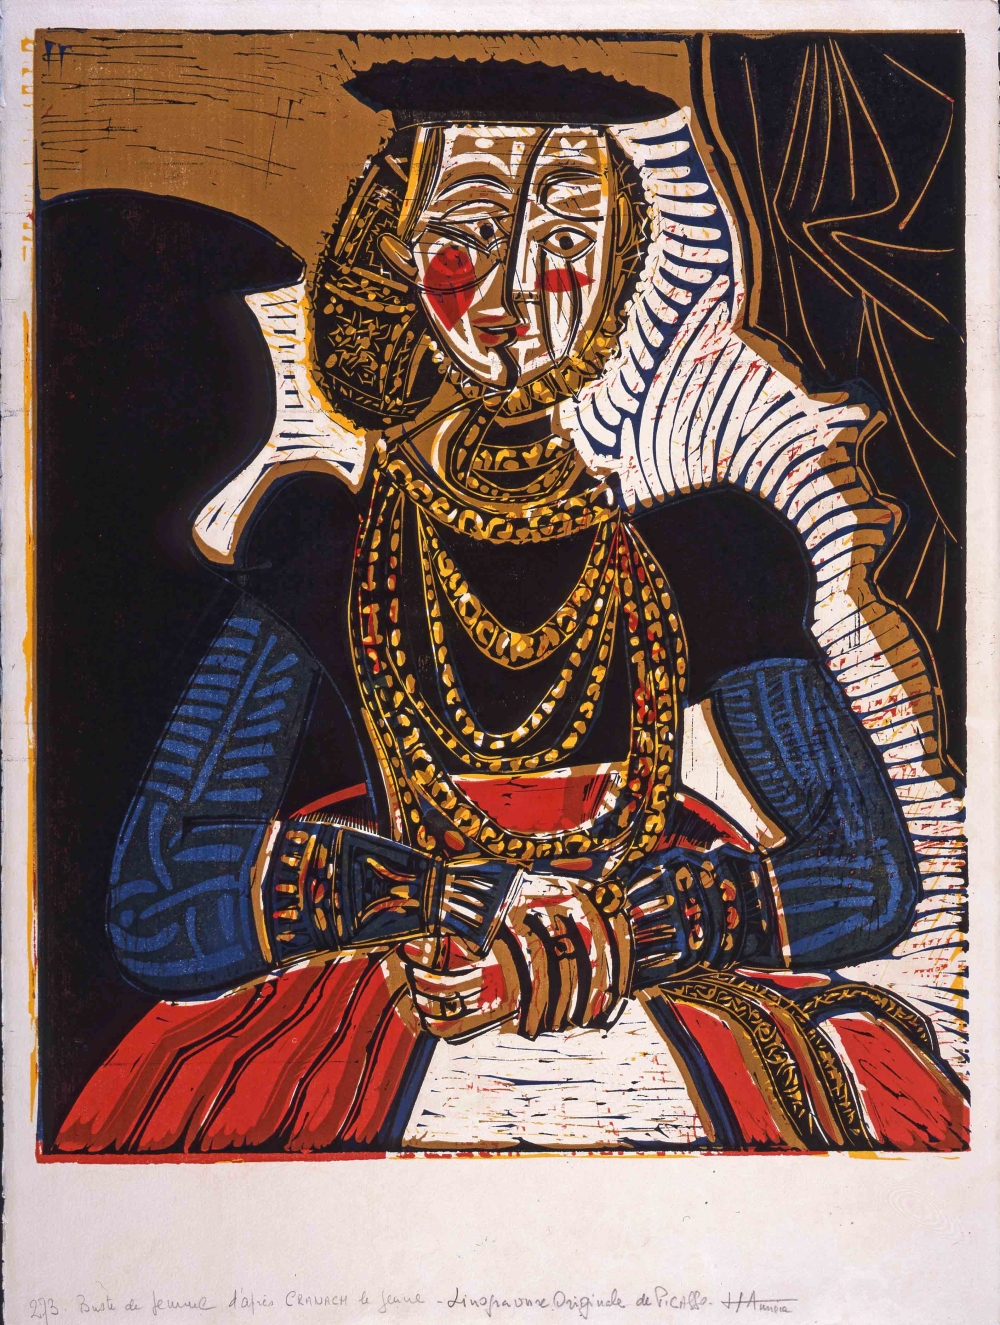 A Pablo Picasso linocut of a young woman